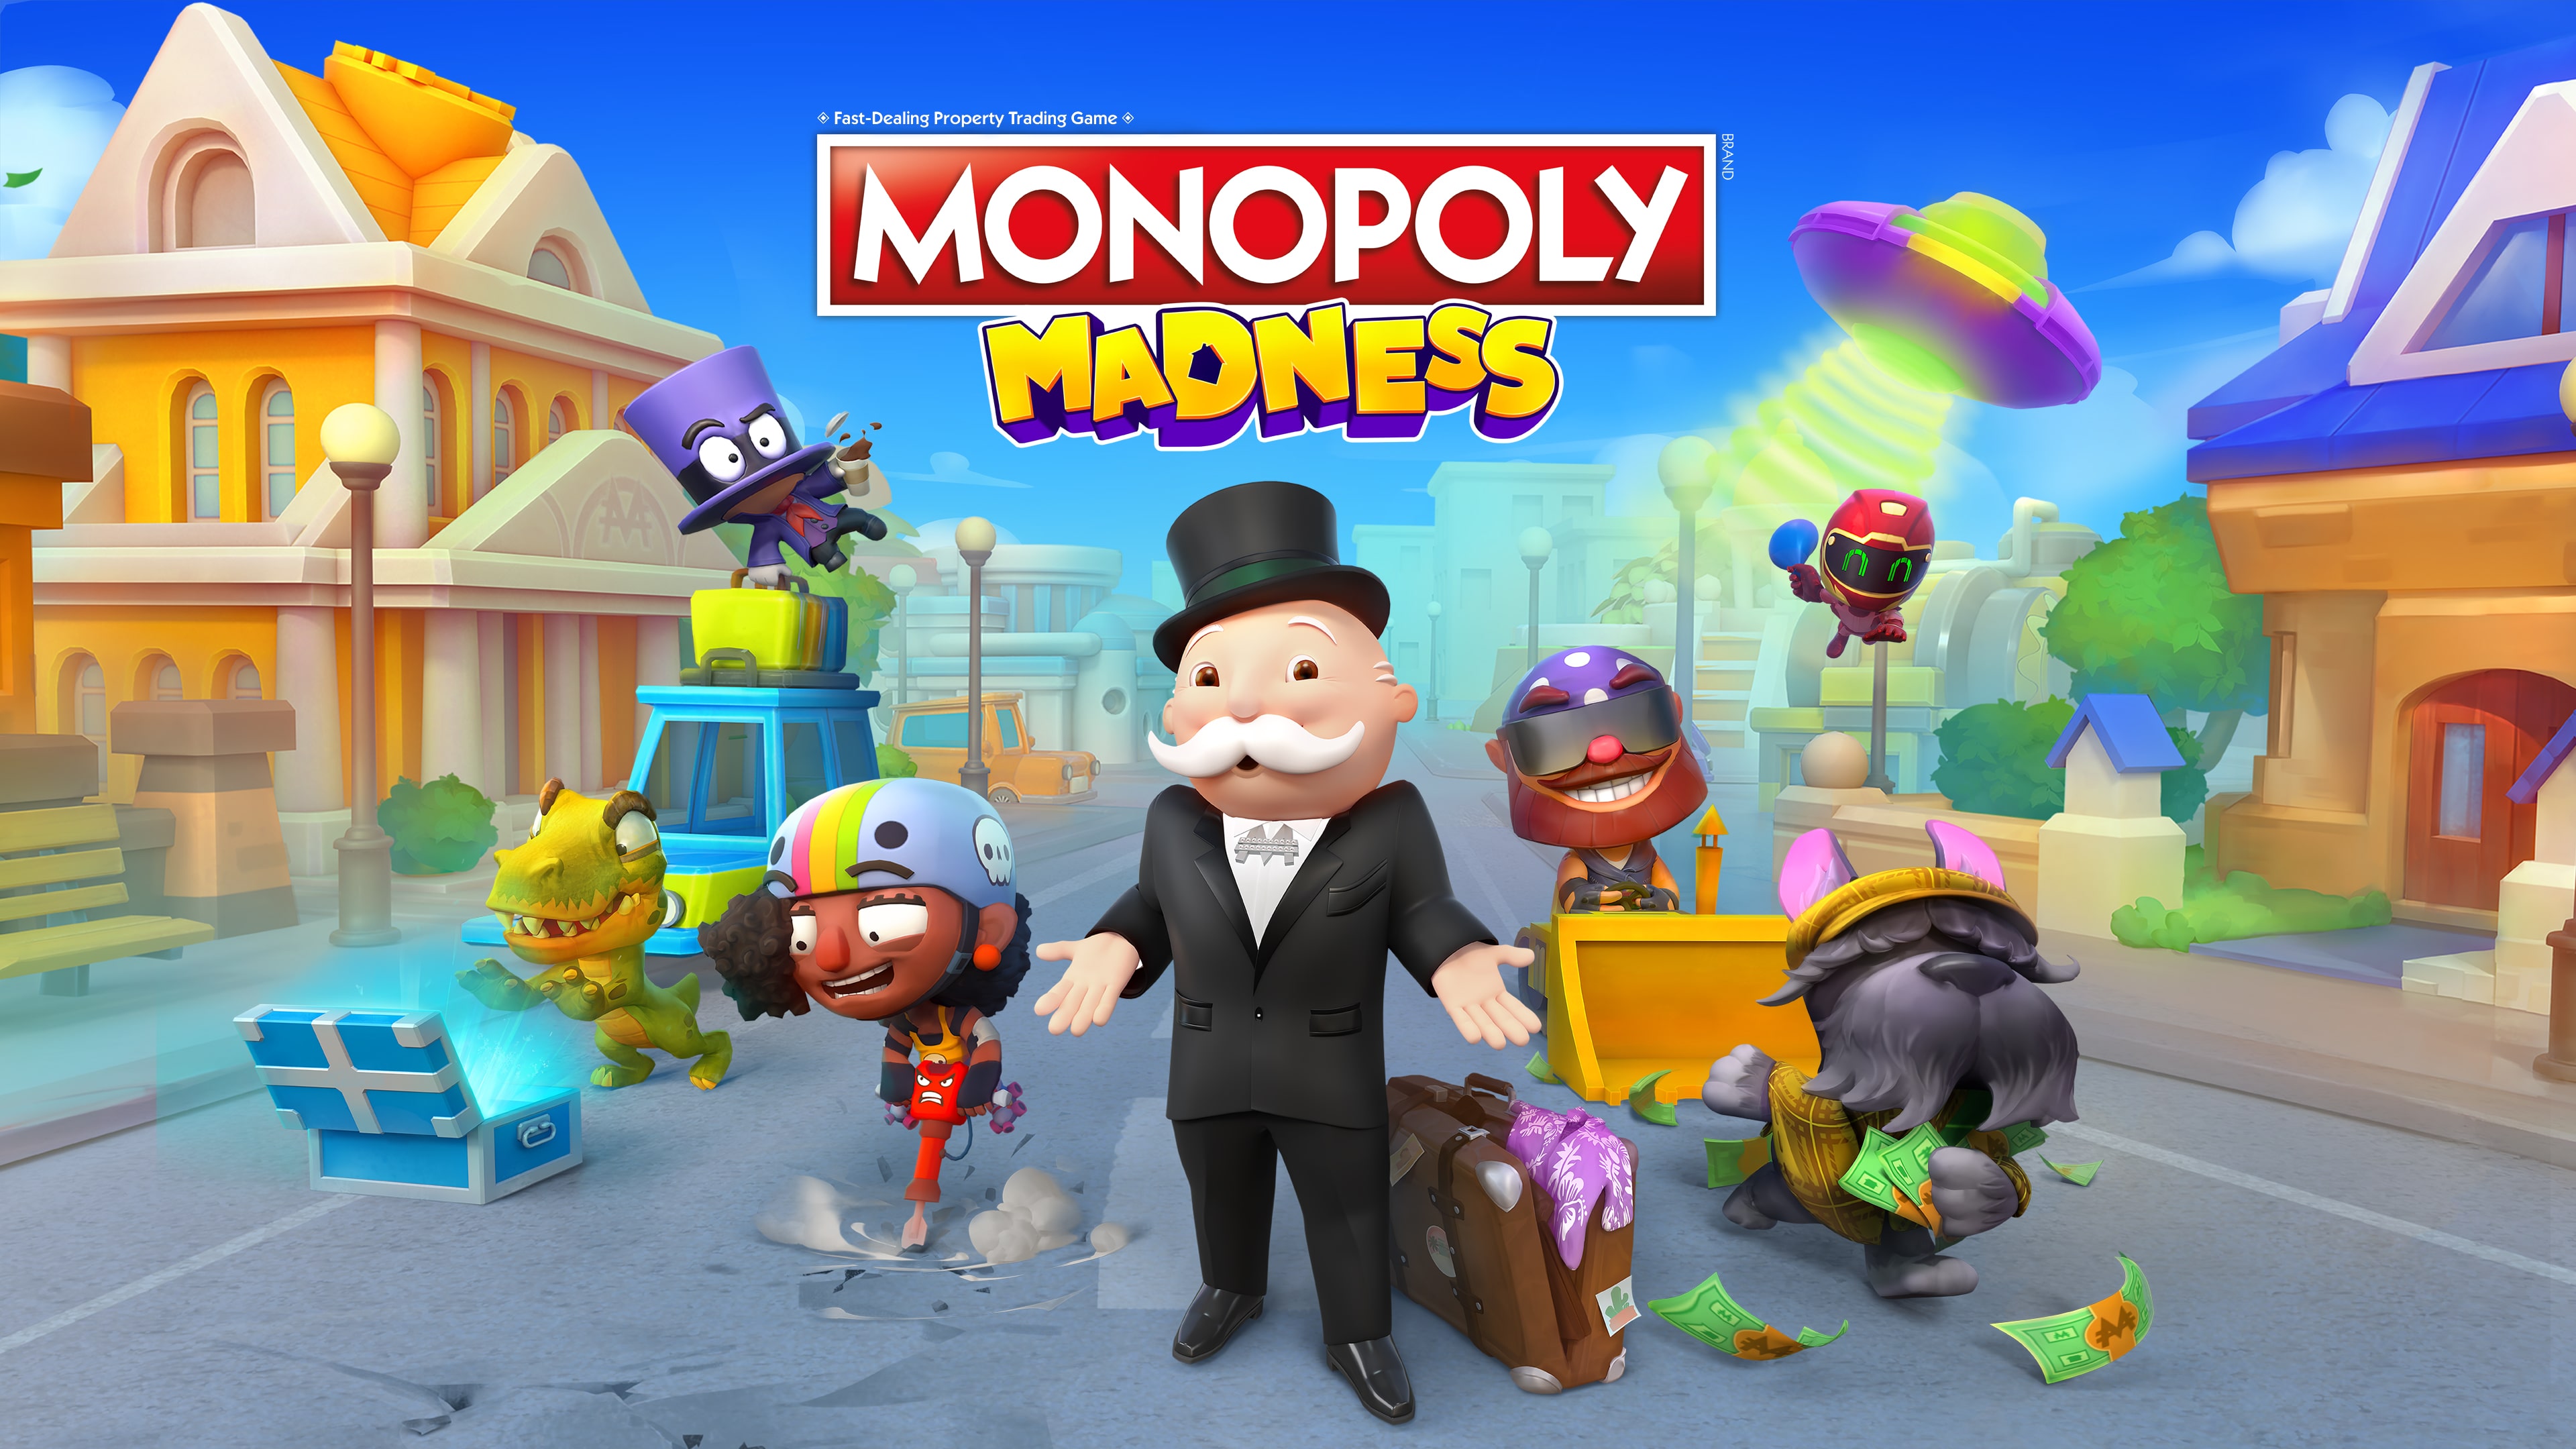 MONOPOLY® Madness (Simplified Chinese, English, Korean, Japanese, Traditional Chinese)